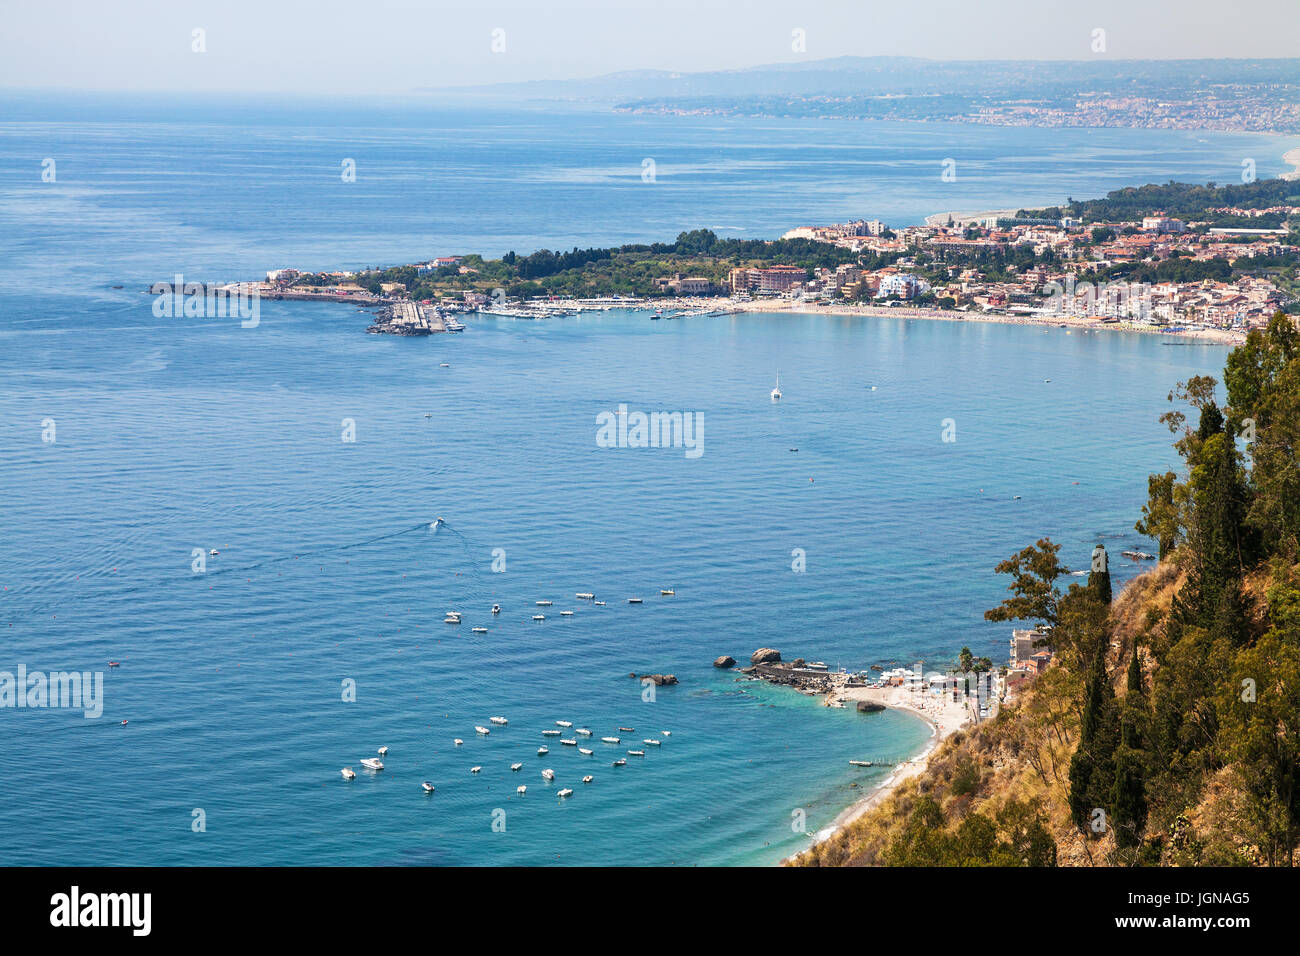 travel to Sicily, Italy - view of Giardini Naxos town on beach of Ionic sea from Belvedere viewpoint at Piazza IX Aprile in Taormina city Stock Photo